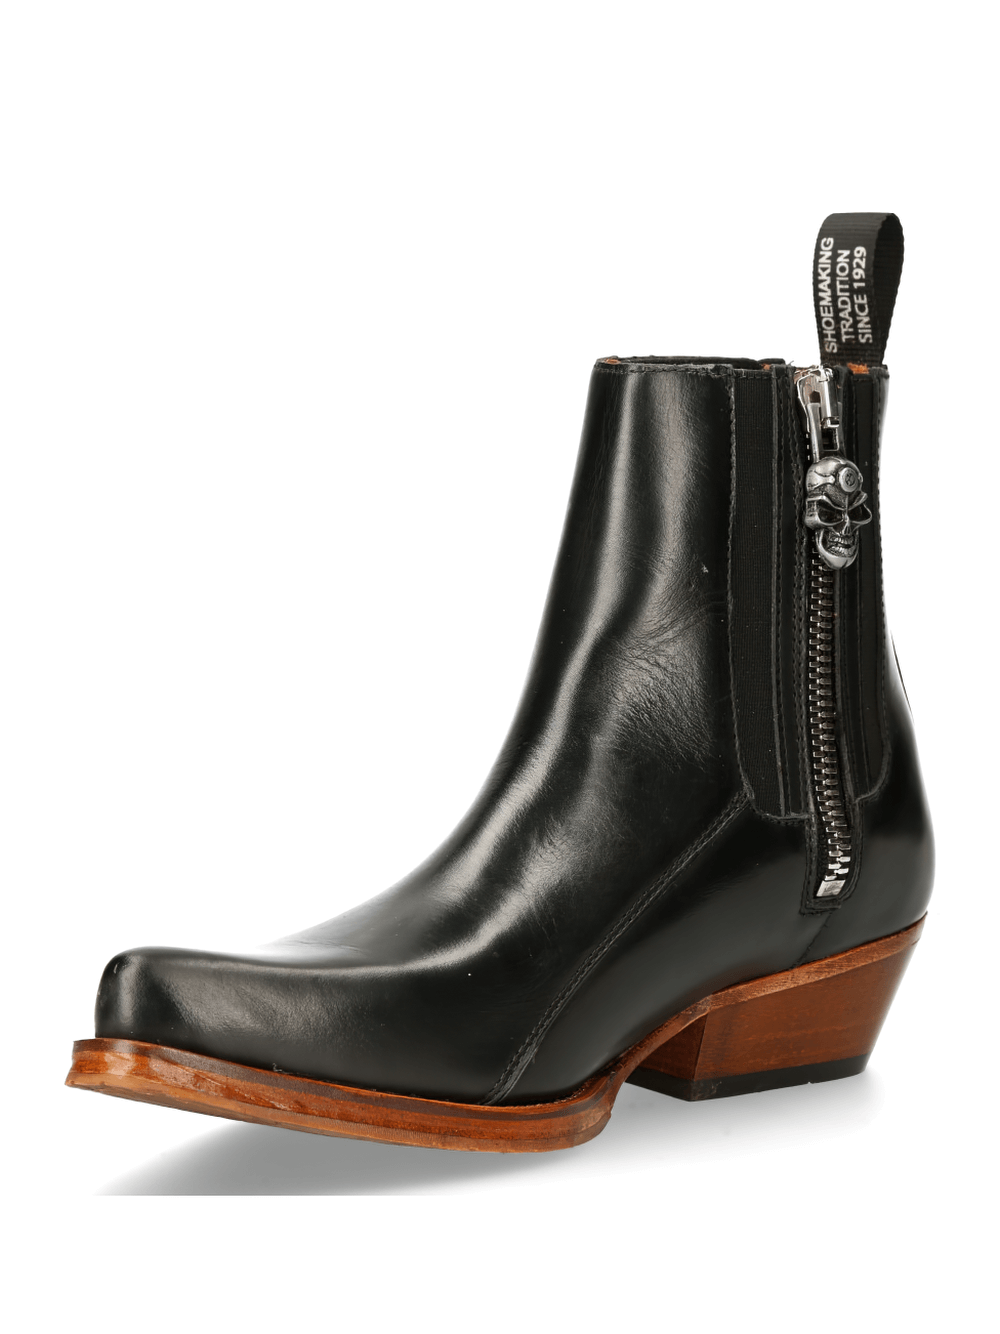 NEW ROCK Chic Black Leather Urban Cowboy Boots